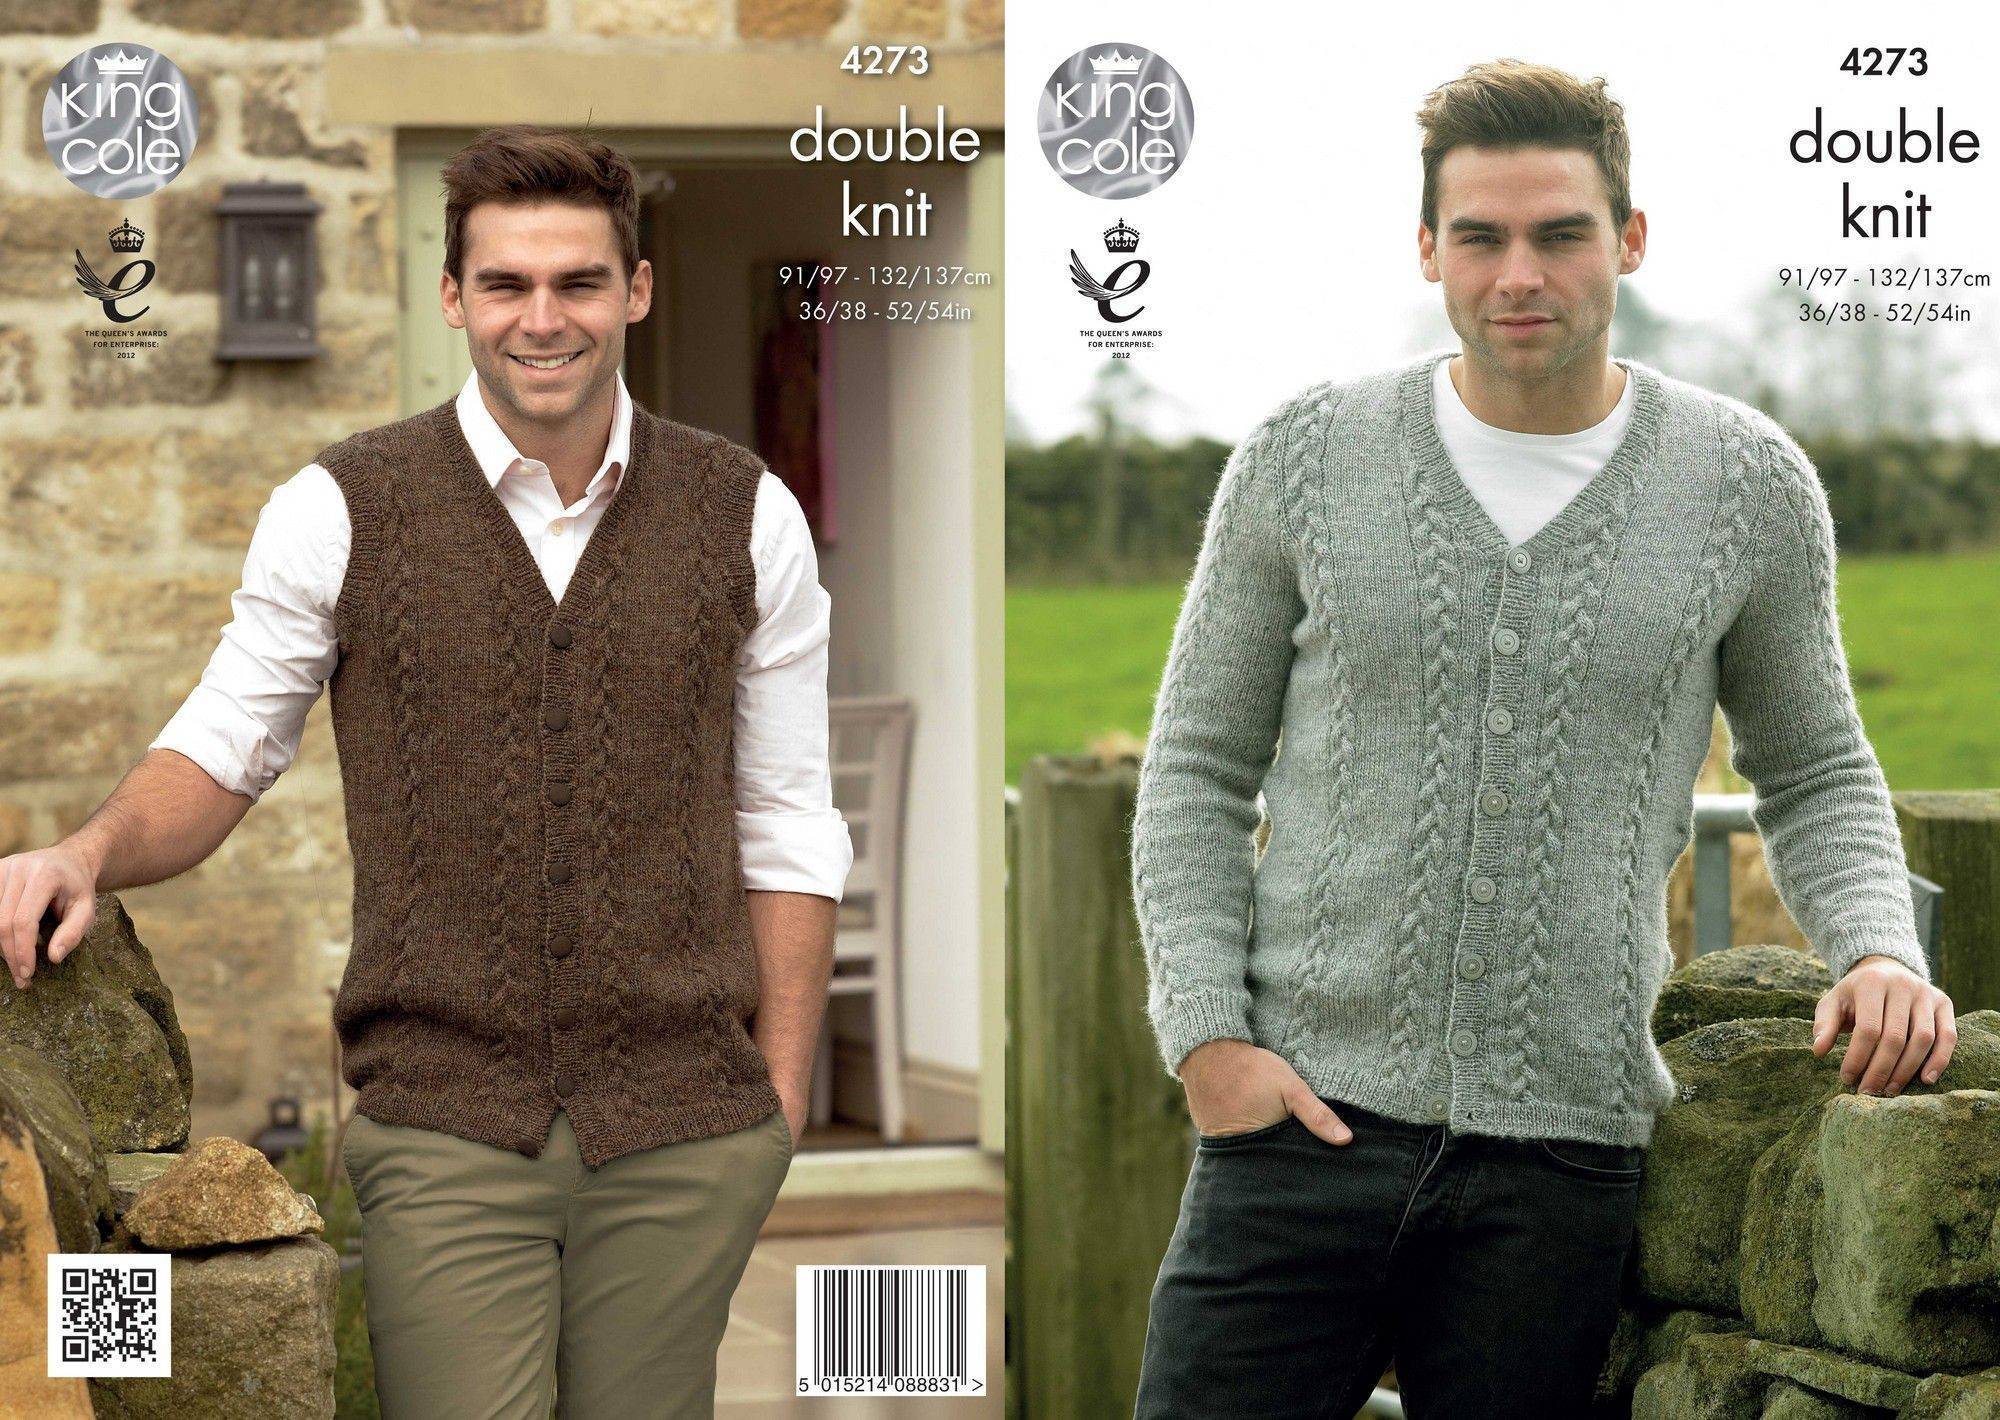 Cardigan and Waistcoat in Panache DK (4273) | The Knitting Network